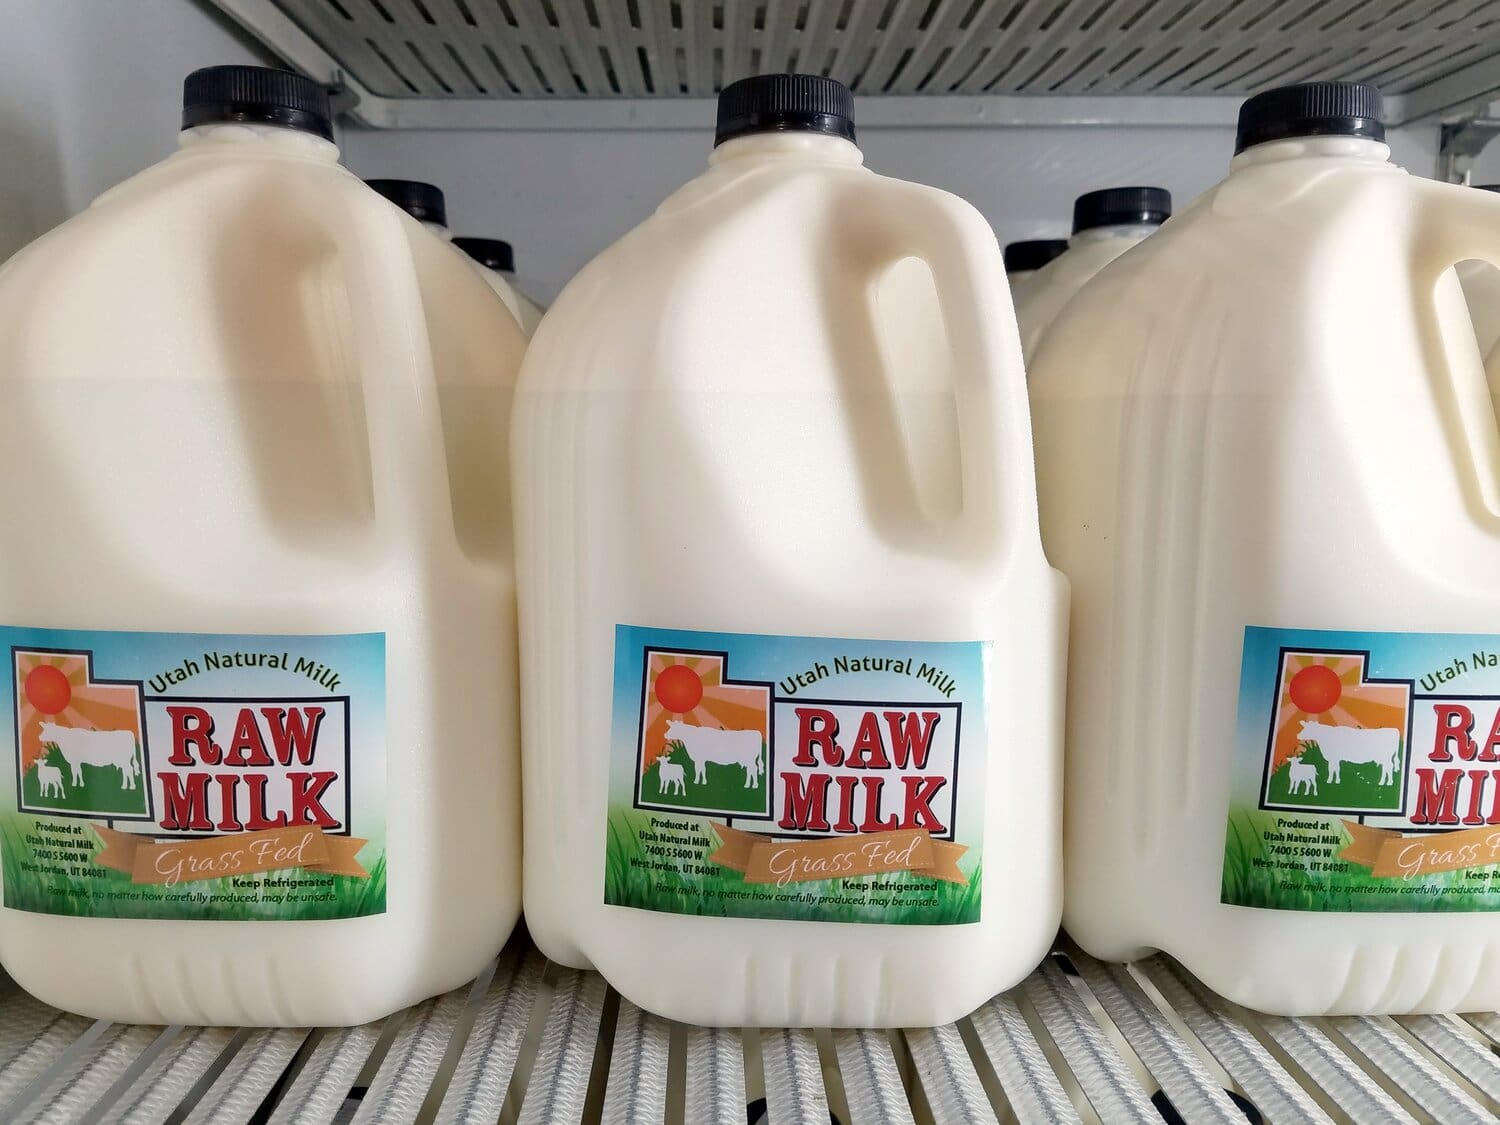 A new bill aims to legalize the sale of raw milk in Delaware. (Photo by Utah Natural Meat)